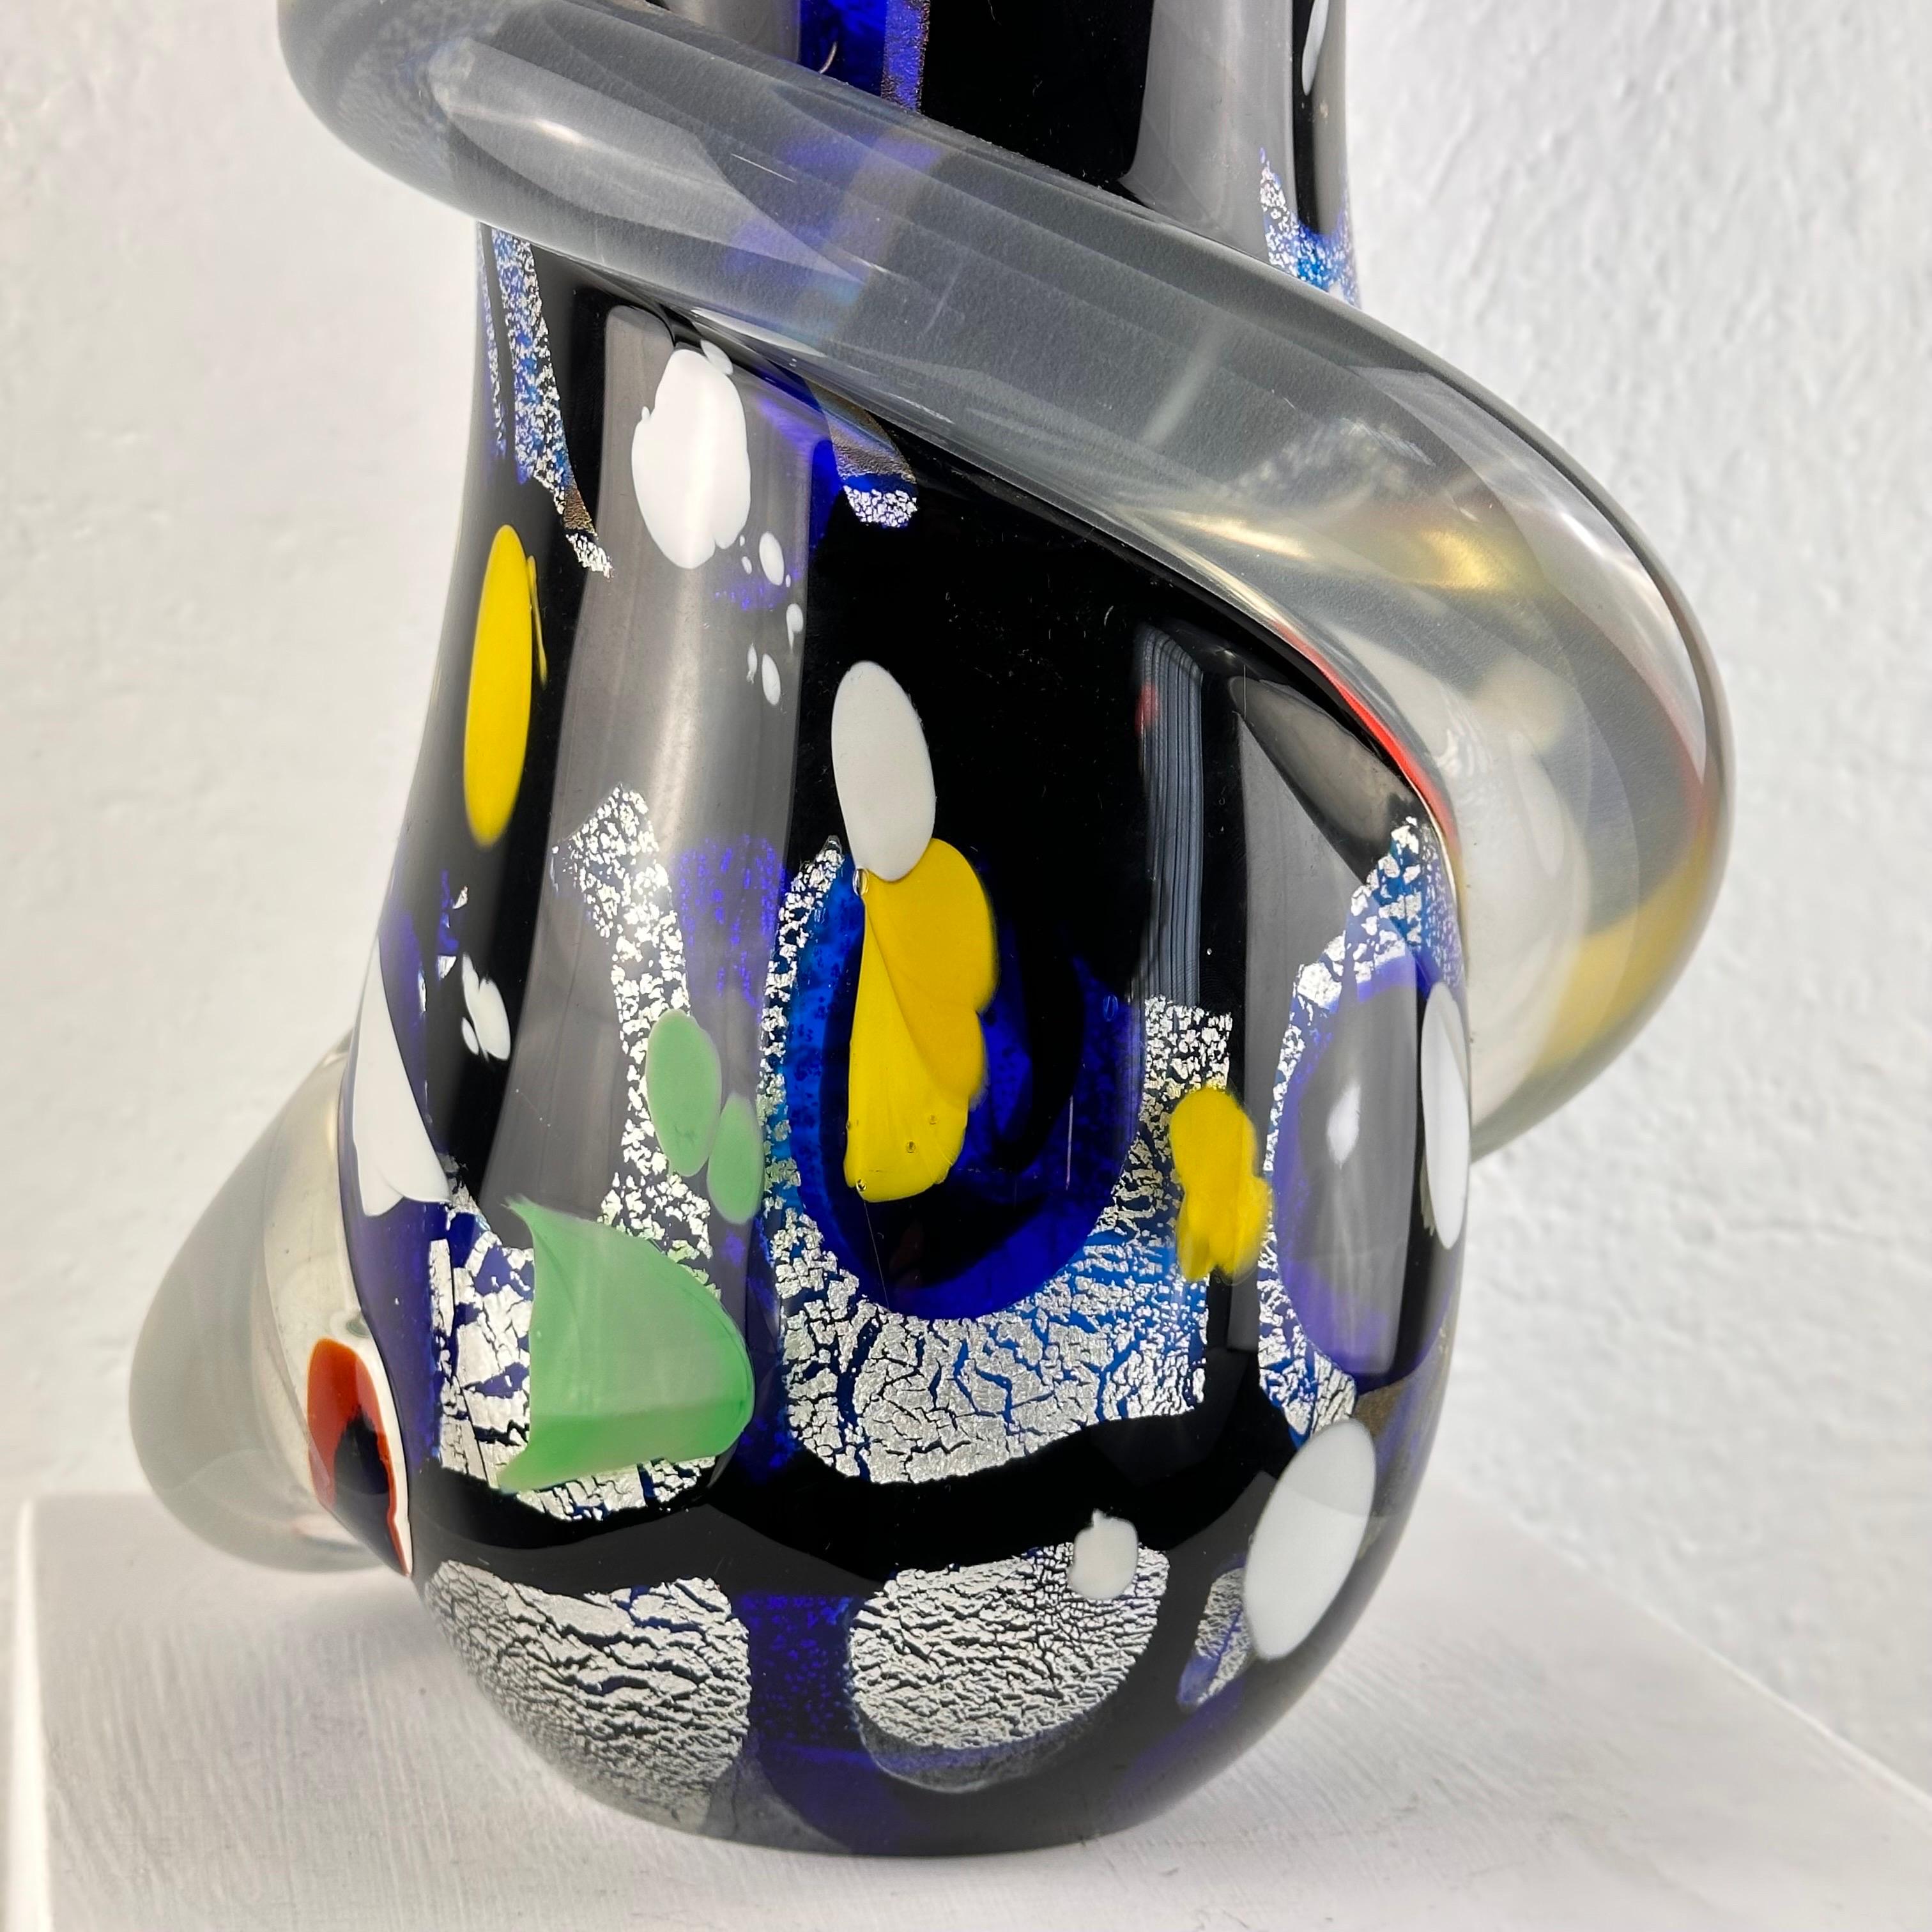 Exquisite Abstract Murano Glass Vase by S. Toso, Signed 1970s Masterpiece For Sale 5